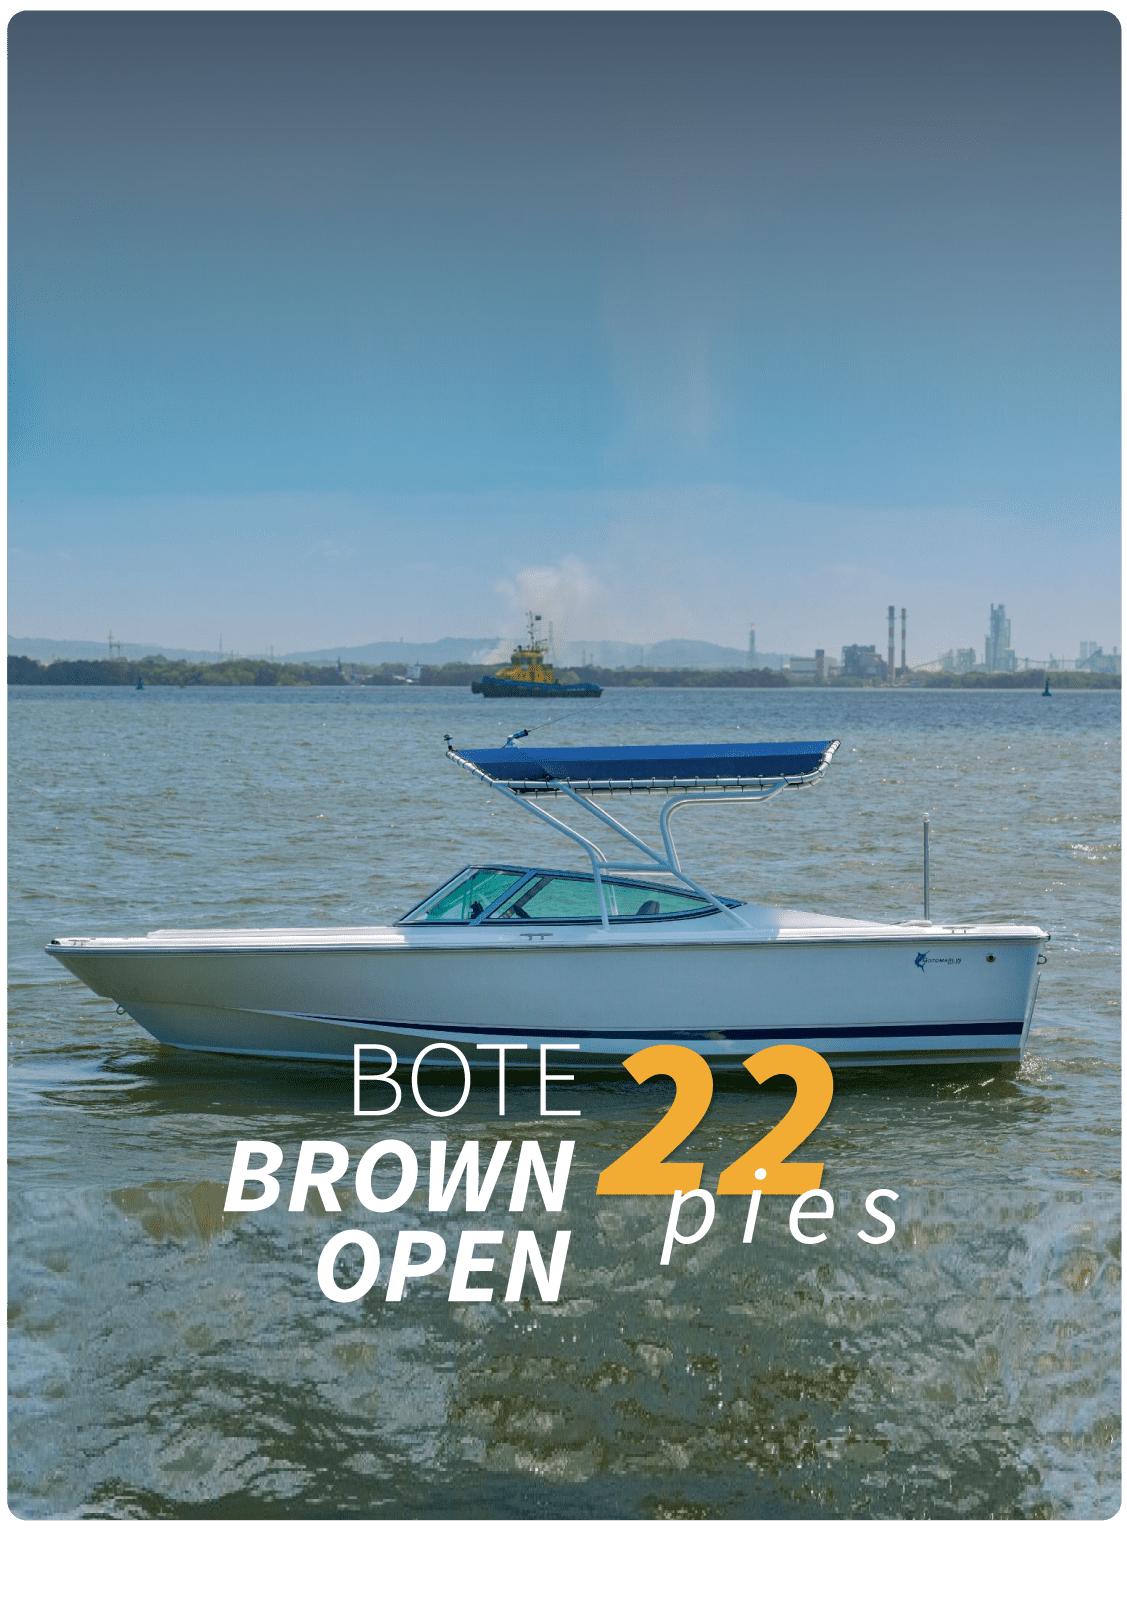 bote brown open 22